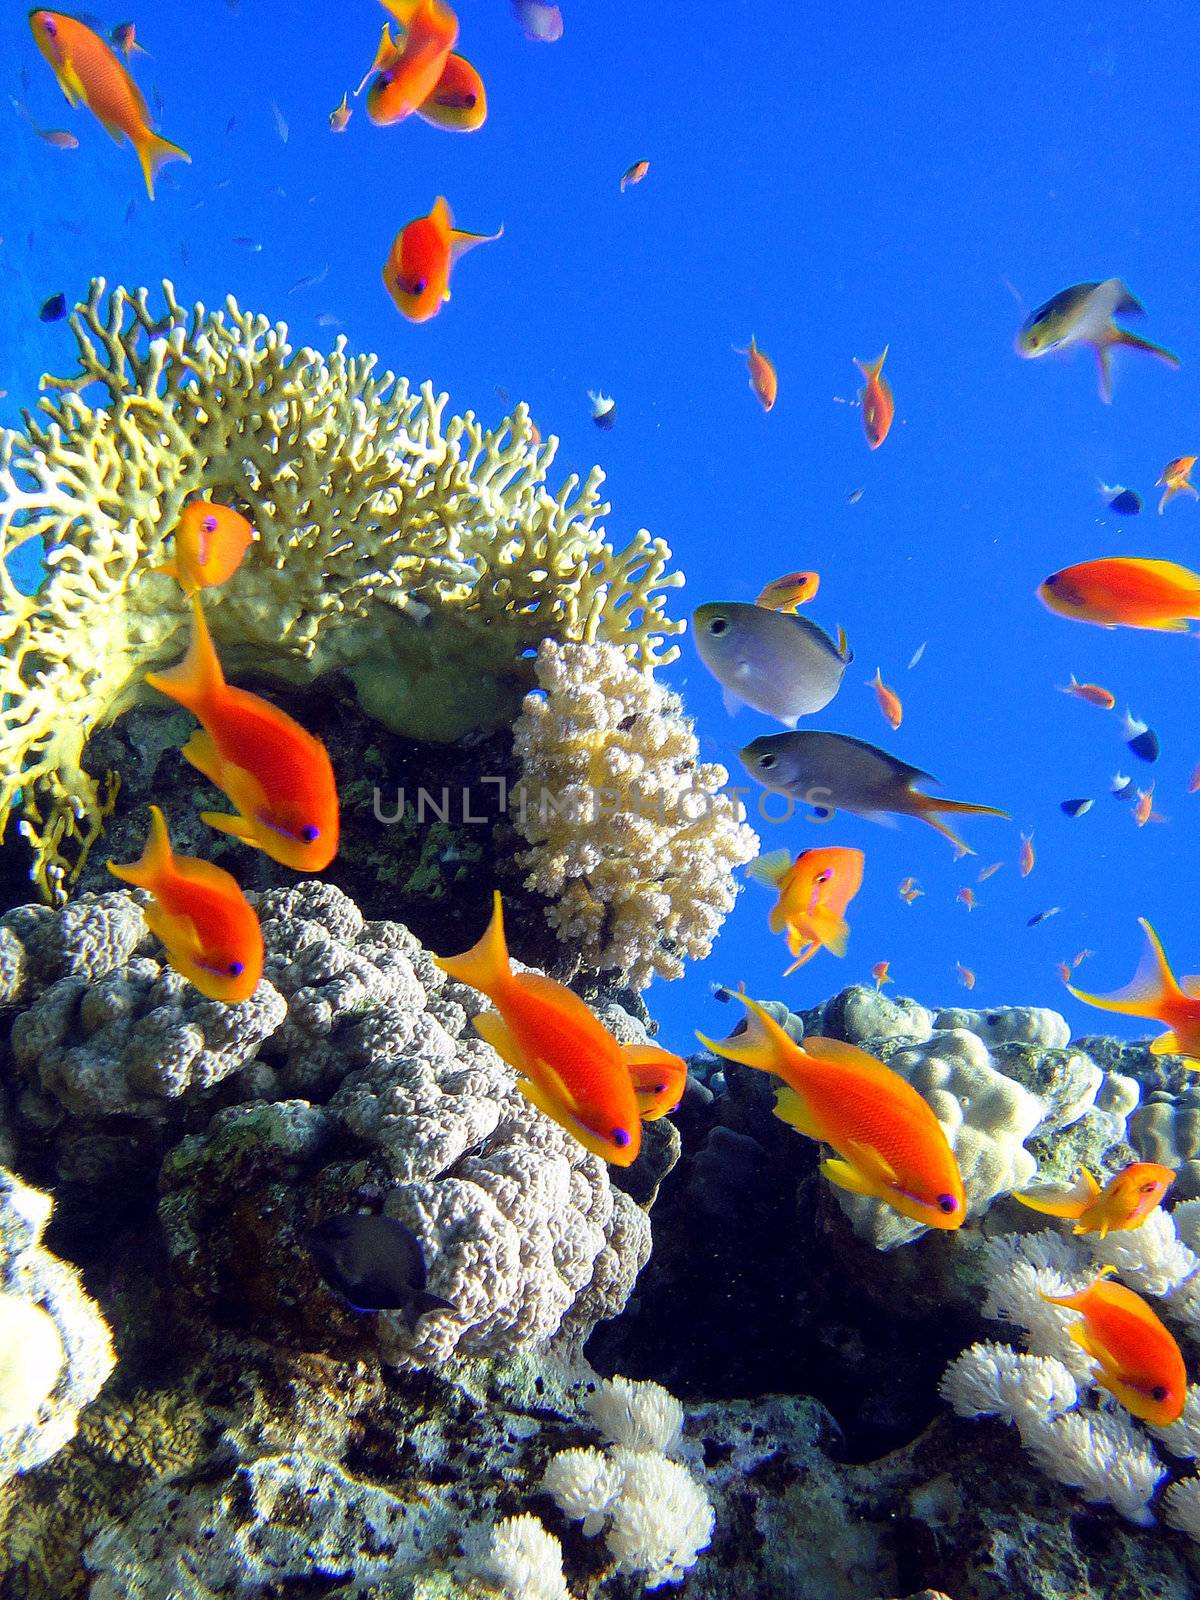 Red fishes in Red sea 2 by georg777